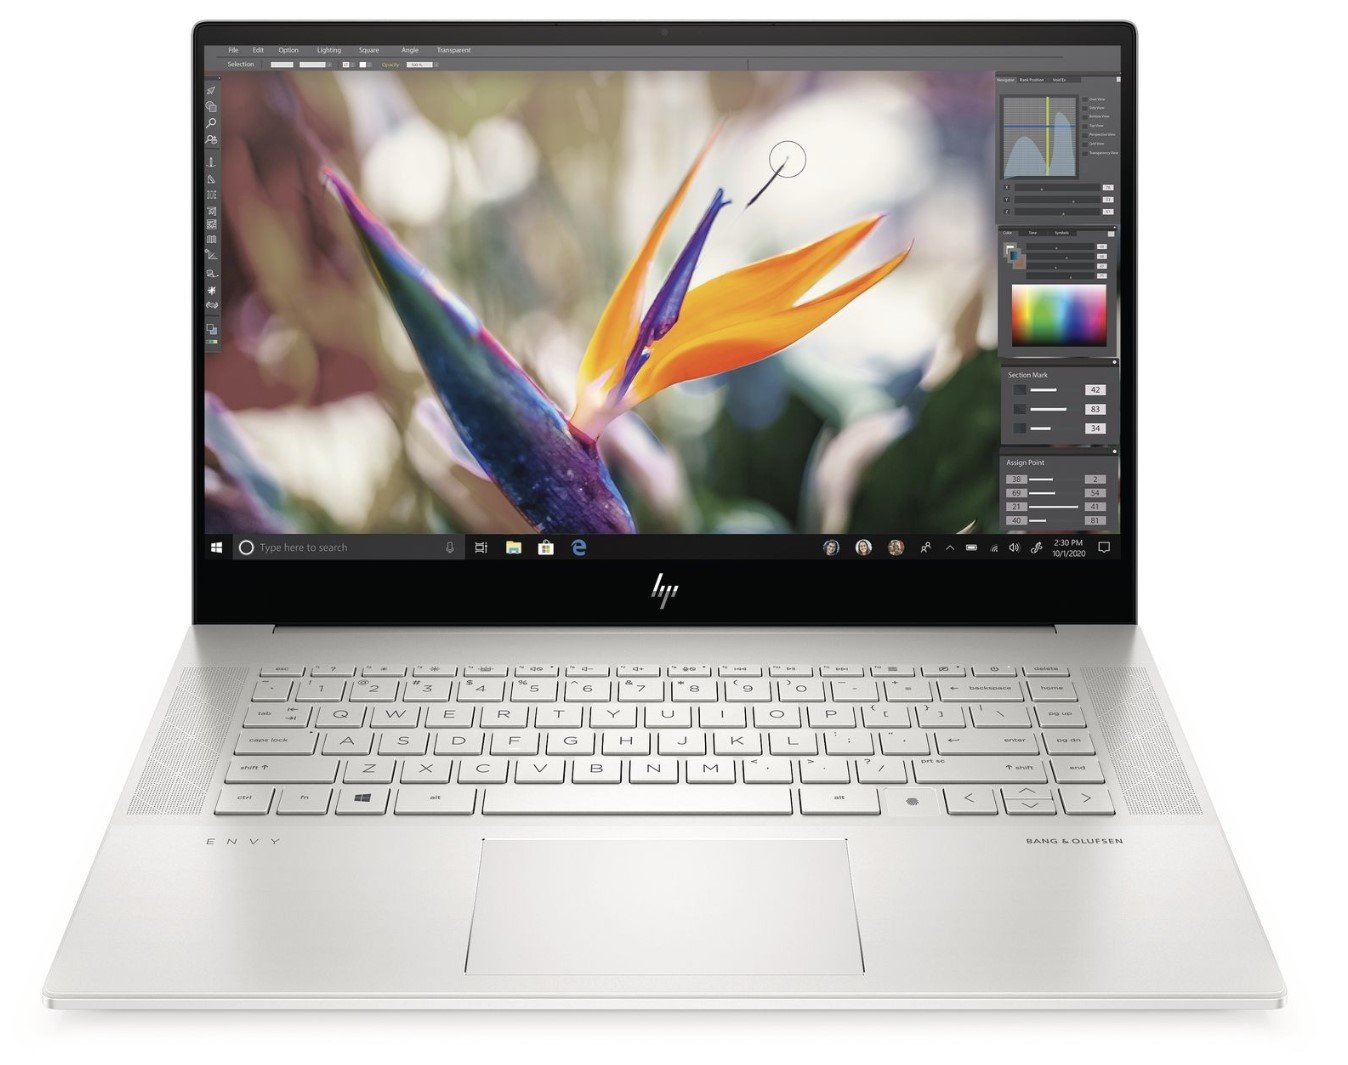 HP ENVY 15 for 2020 takes on the MacBook Pro 16 with minimalist 